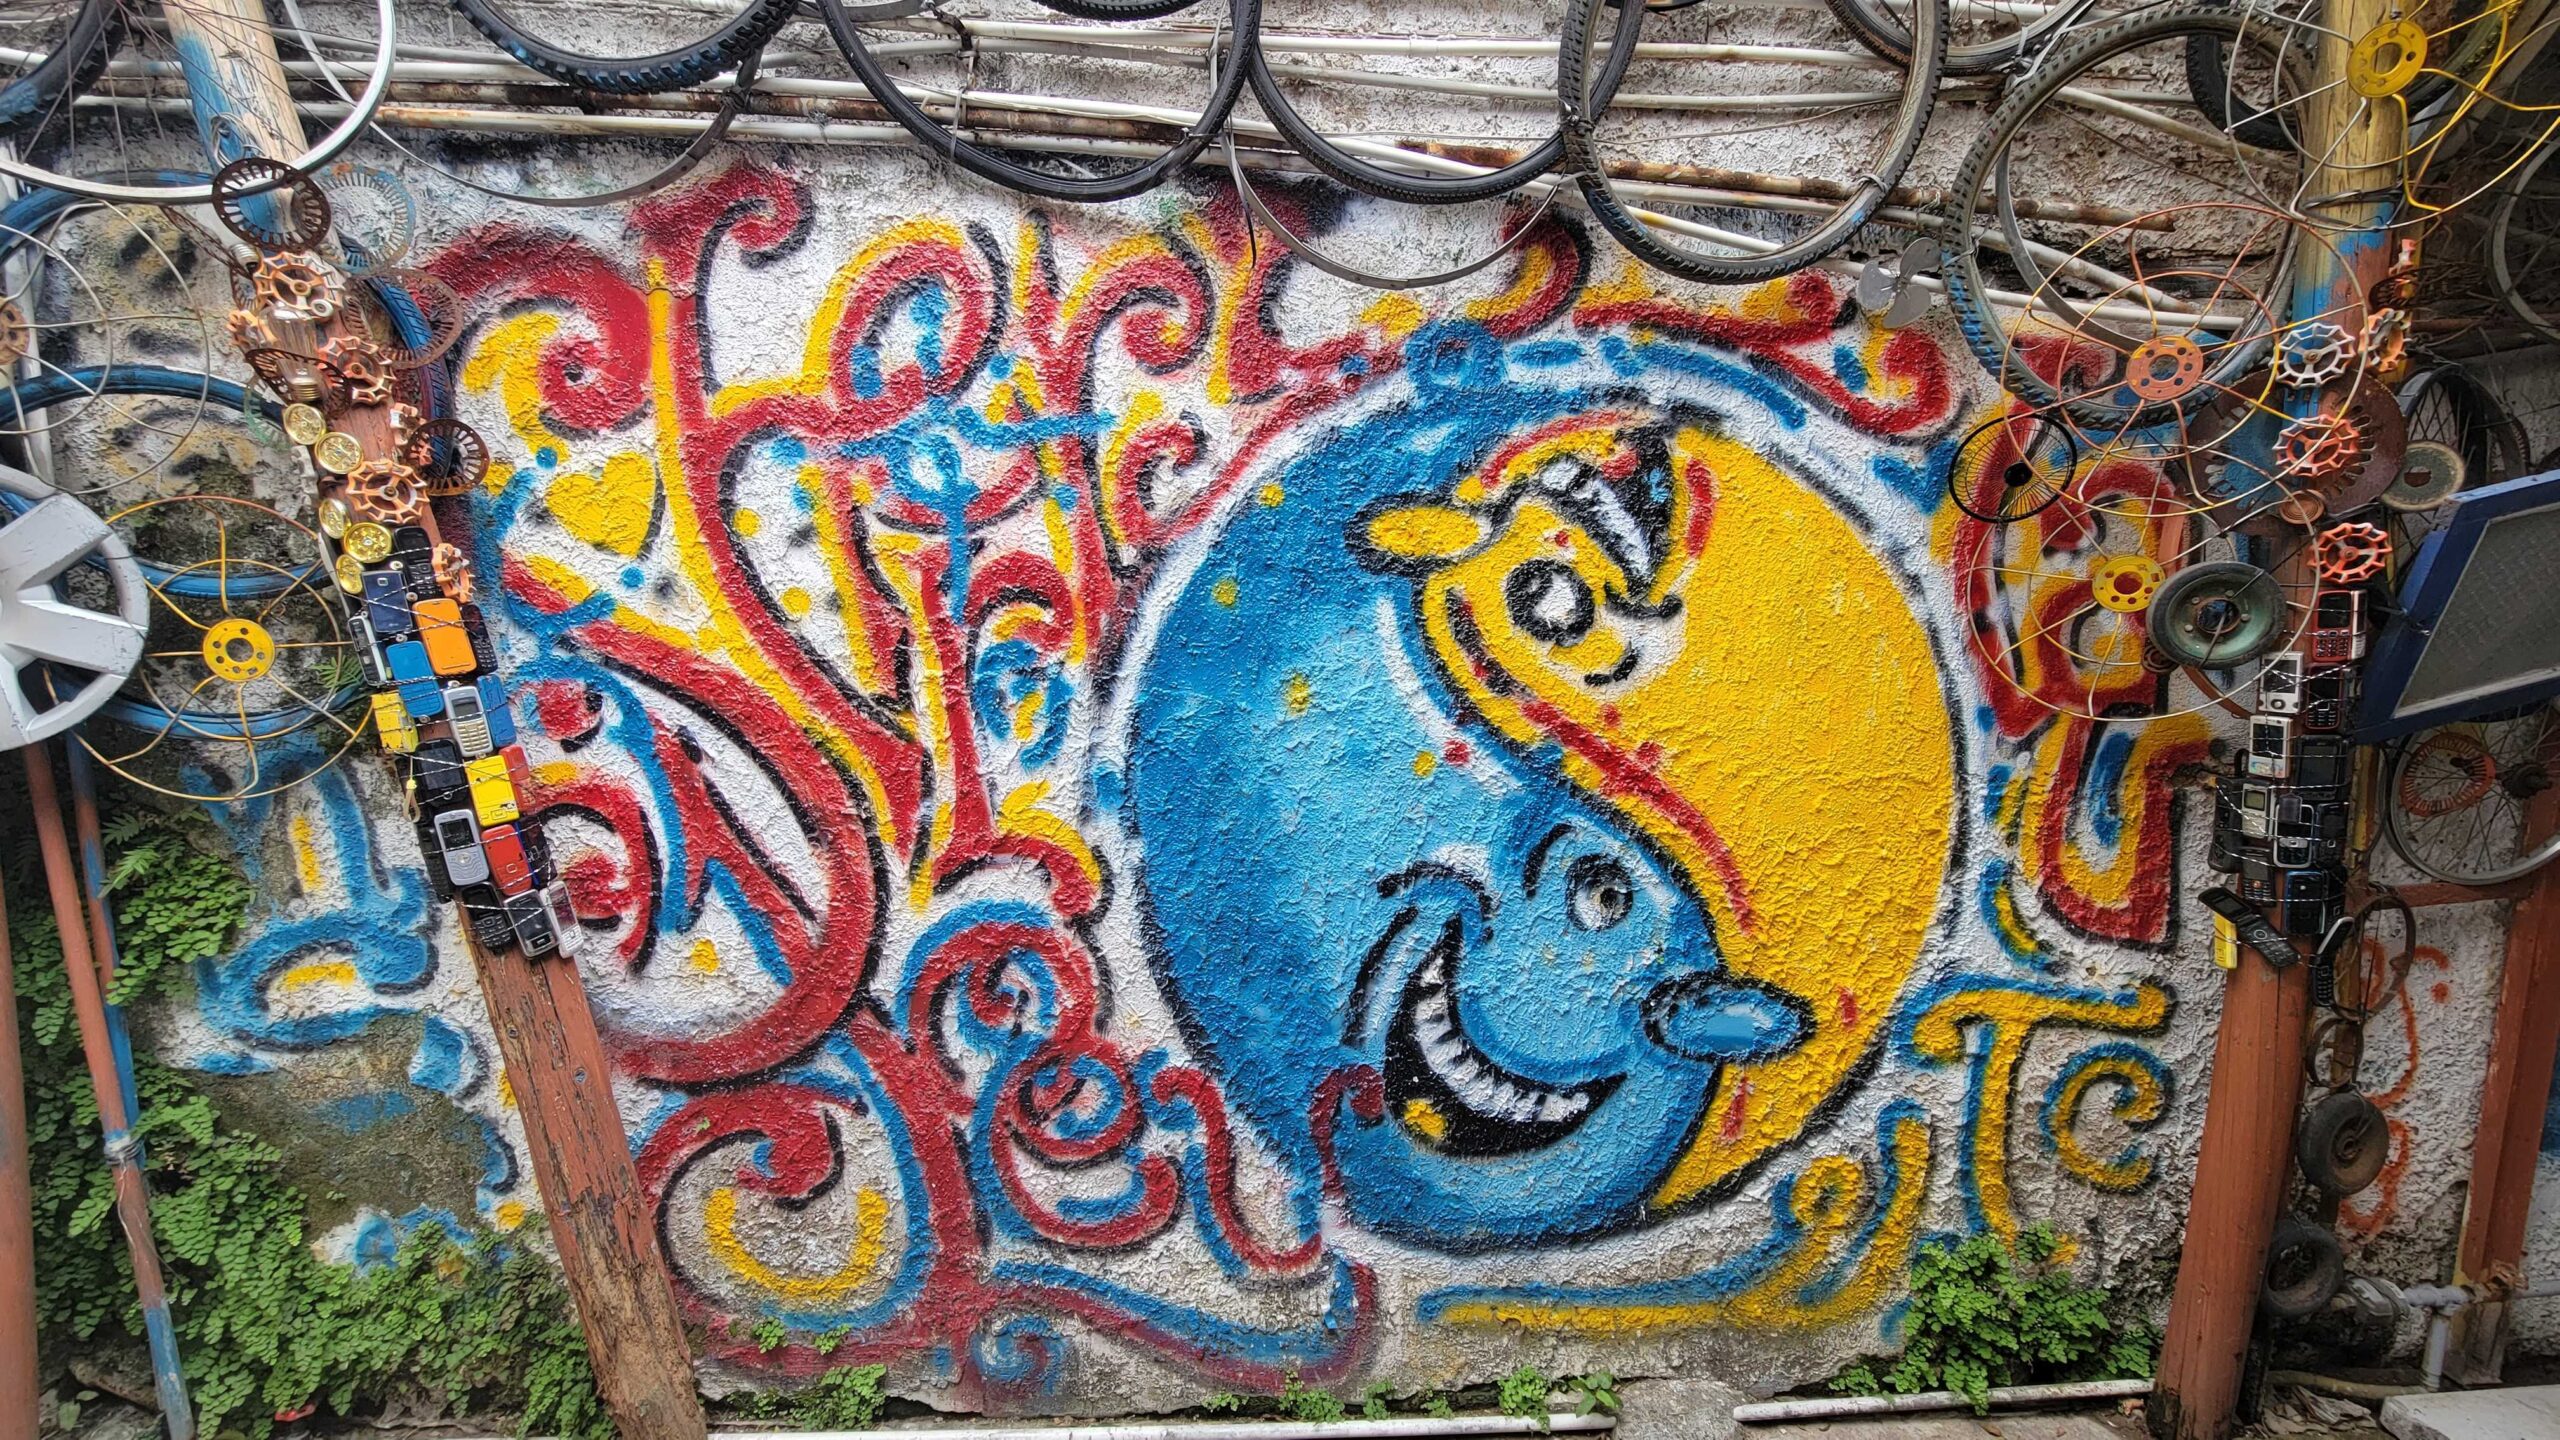 A yin-yang depiction on a wall of a former leather factory in Peng Chau. It is surrounded by odds and ends like bicycle tyres, old cellphones, and gears.